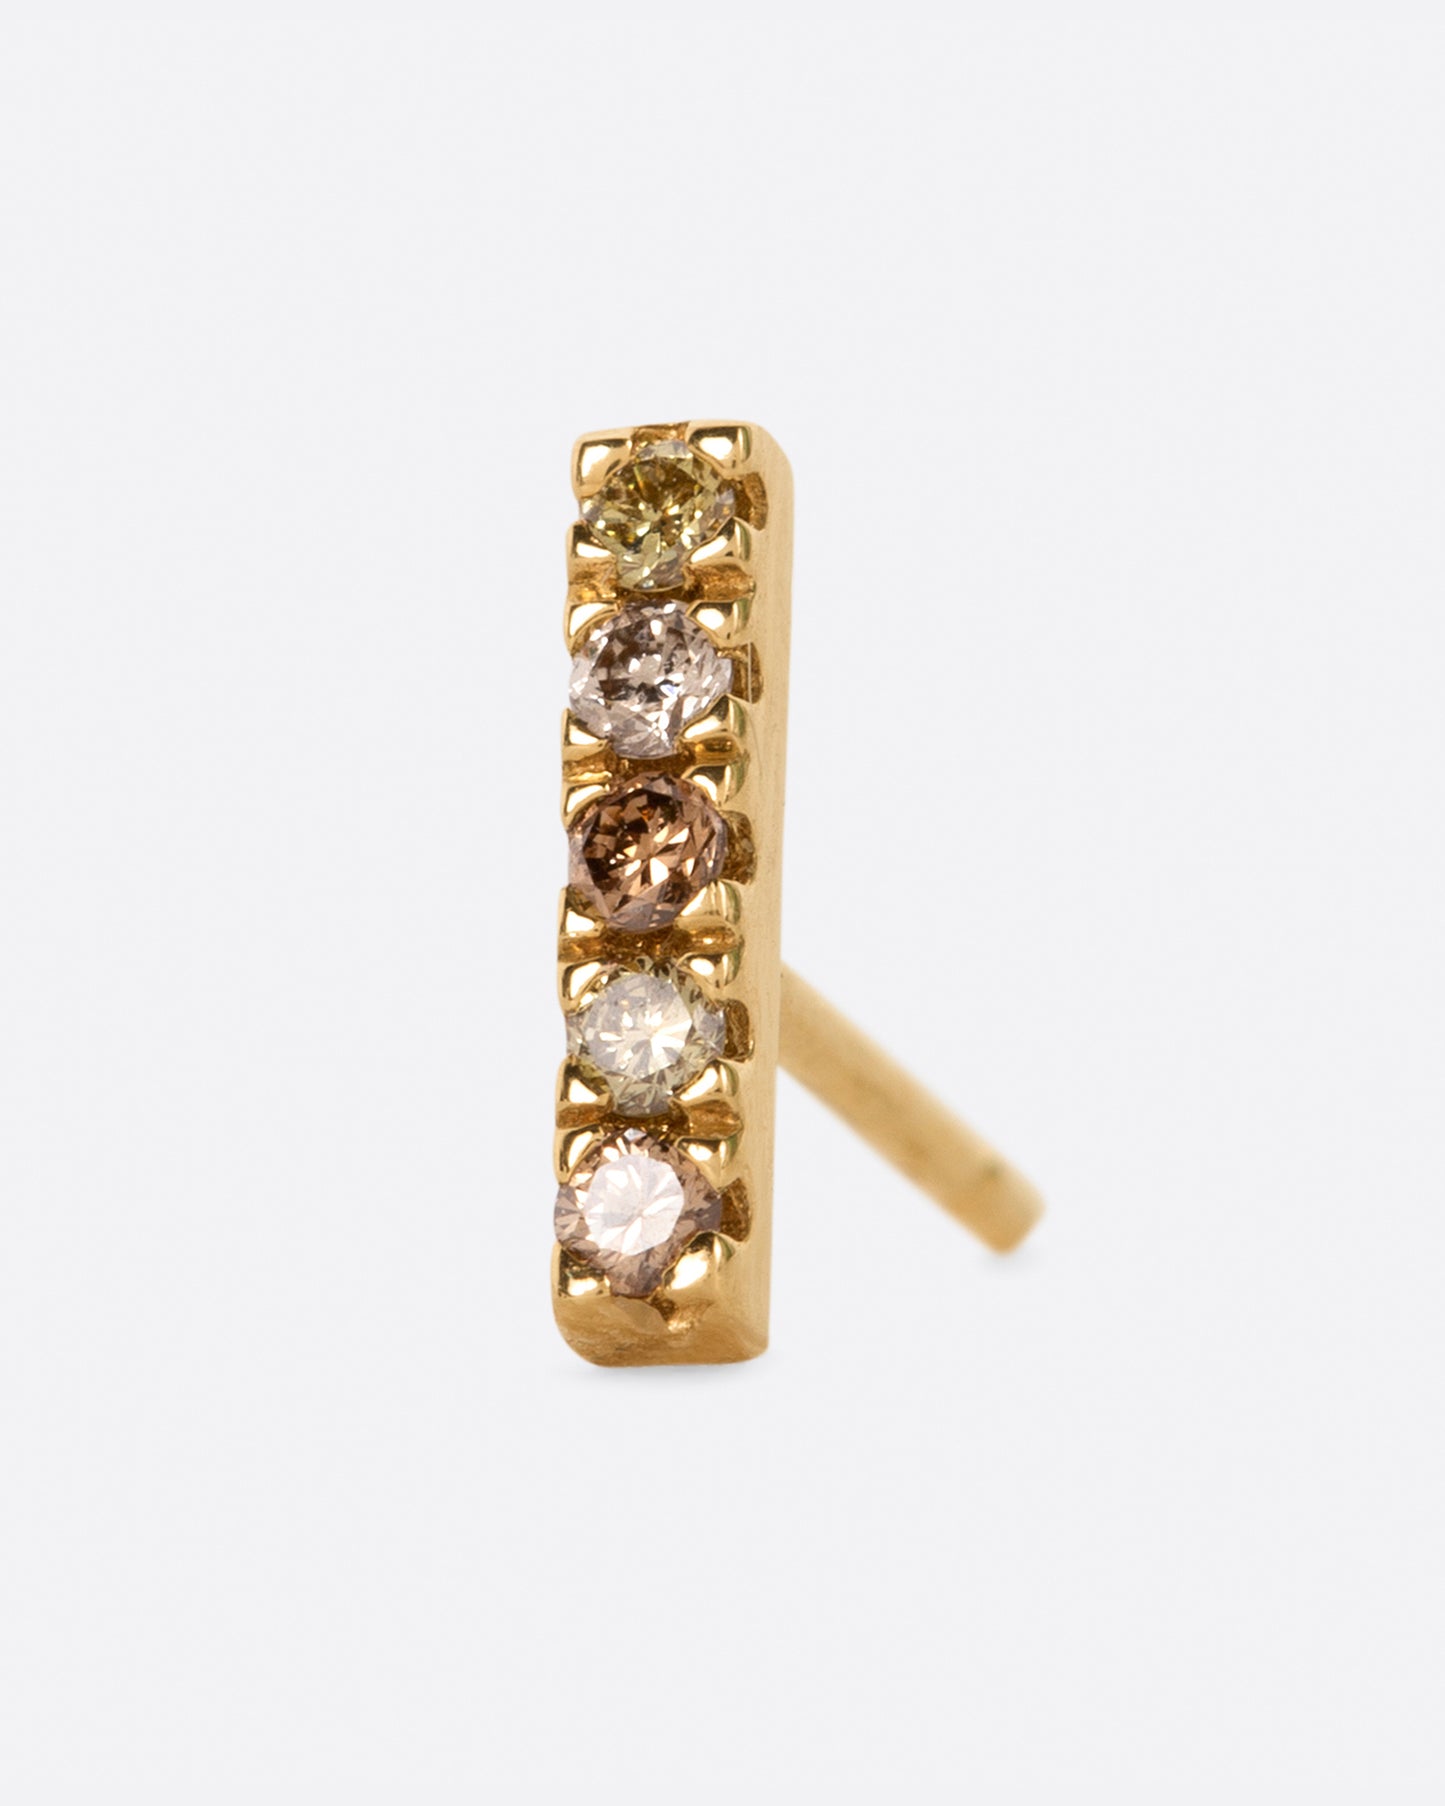 A classic bar stud with a mix of olive, dark and light champagne diamonds.